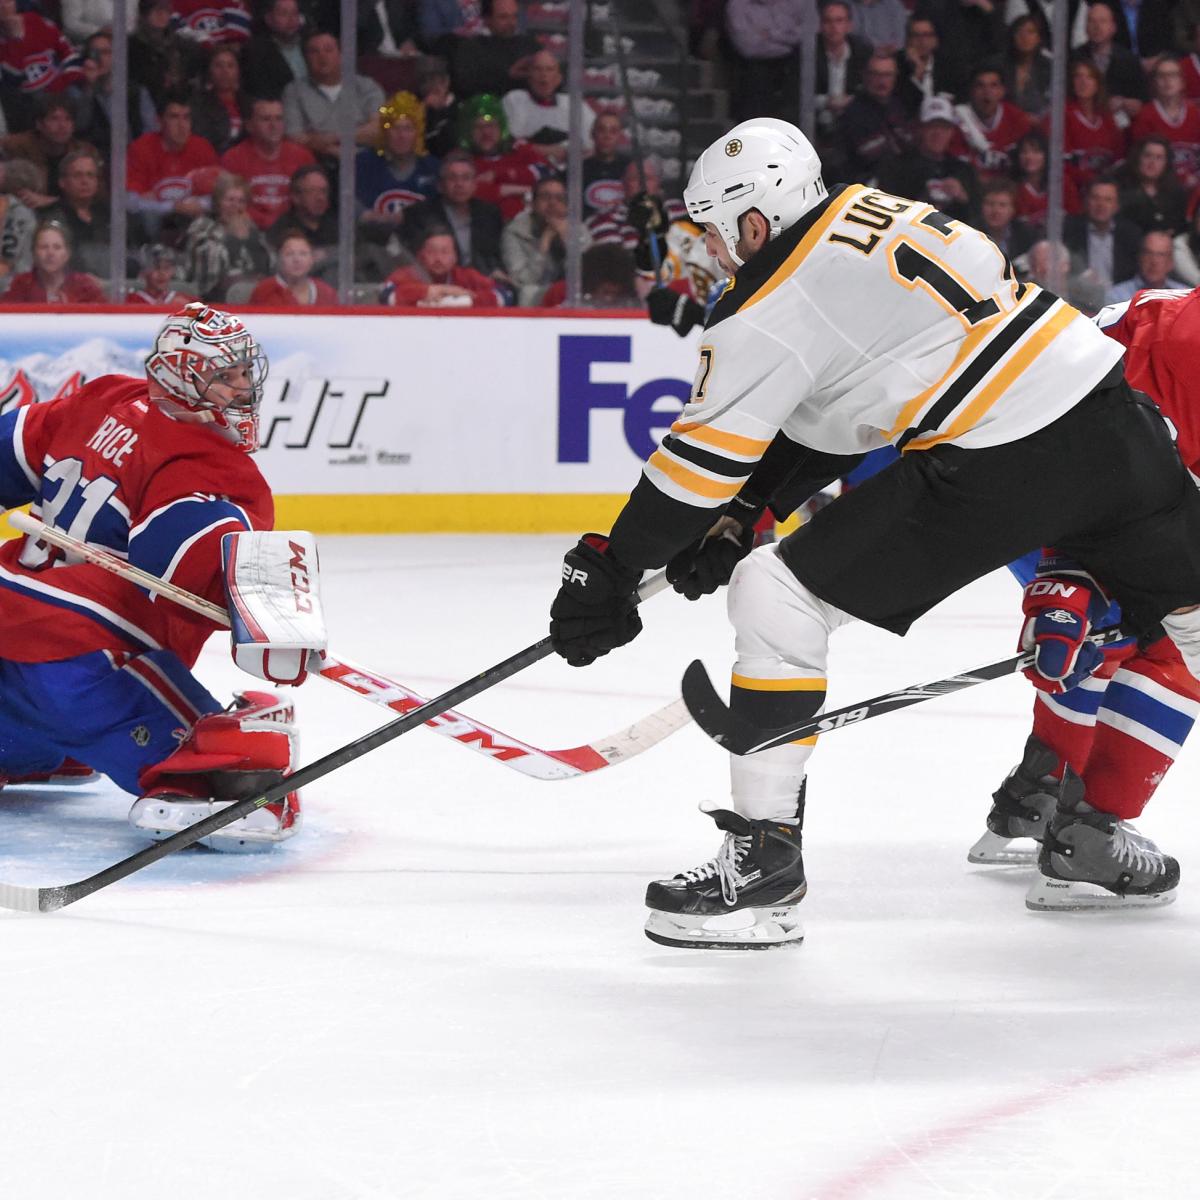 Boston Bruins vs. Montreal Canadiens Game 4 Live Score and Highlights